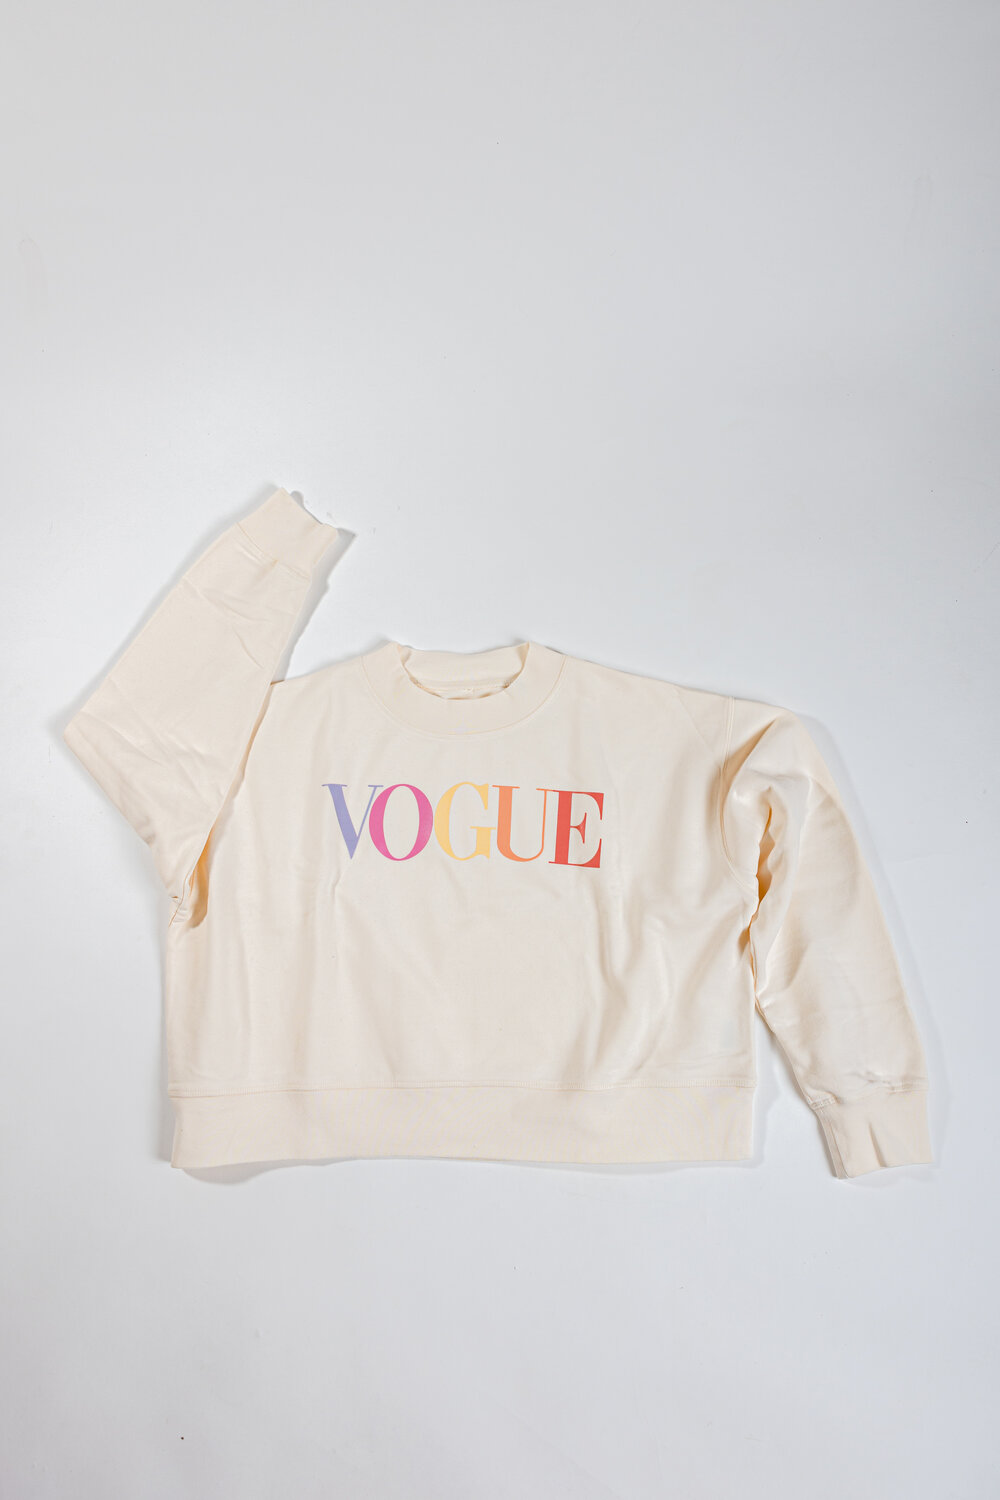 VOGUE Cropped Sweater, Gr. M